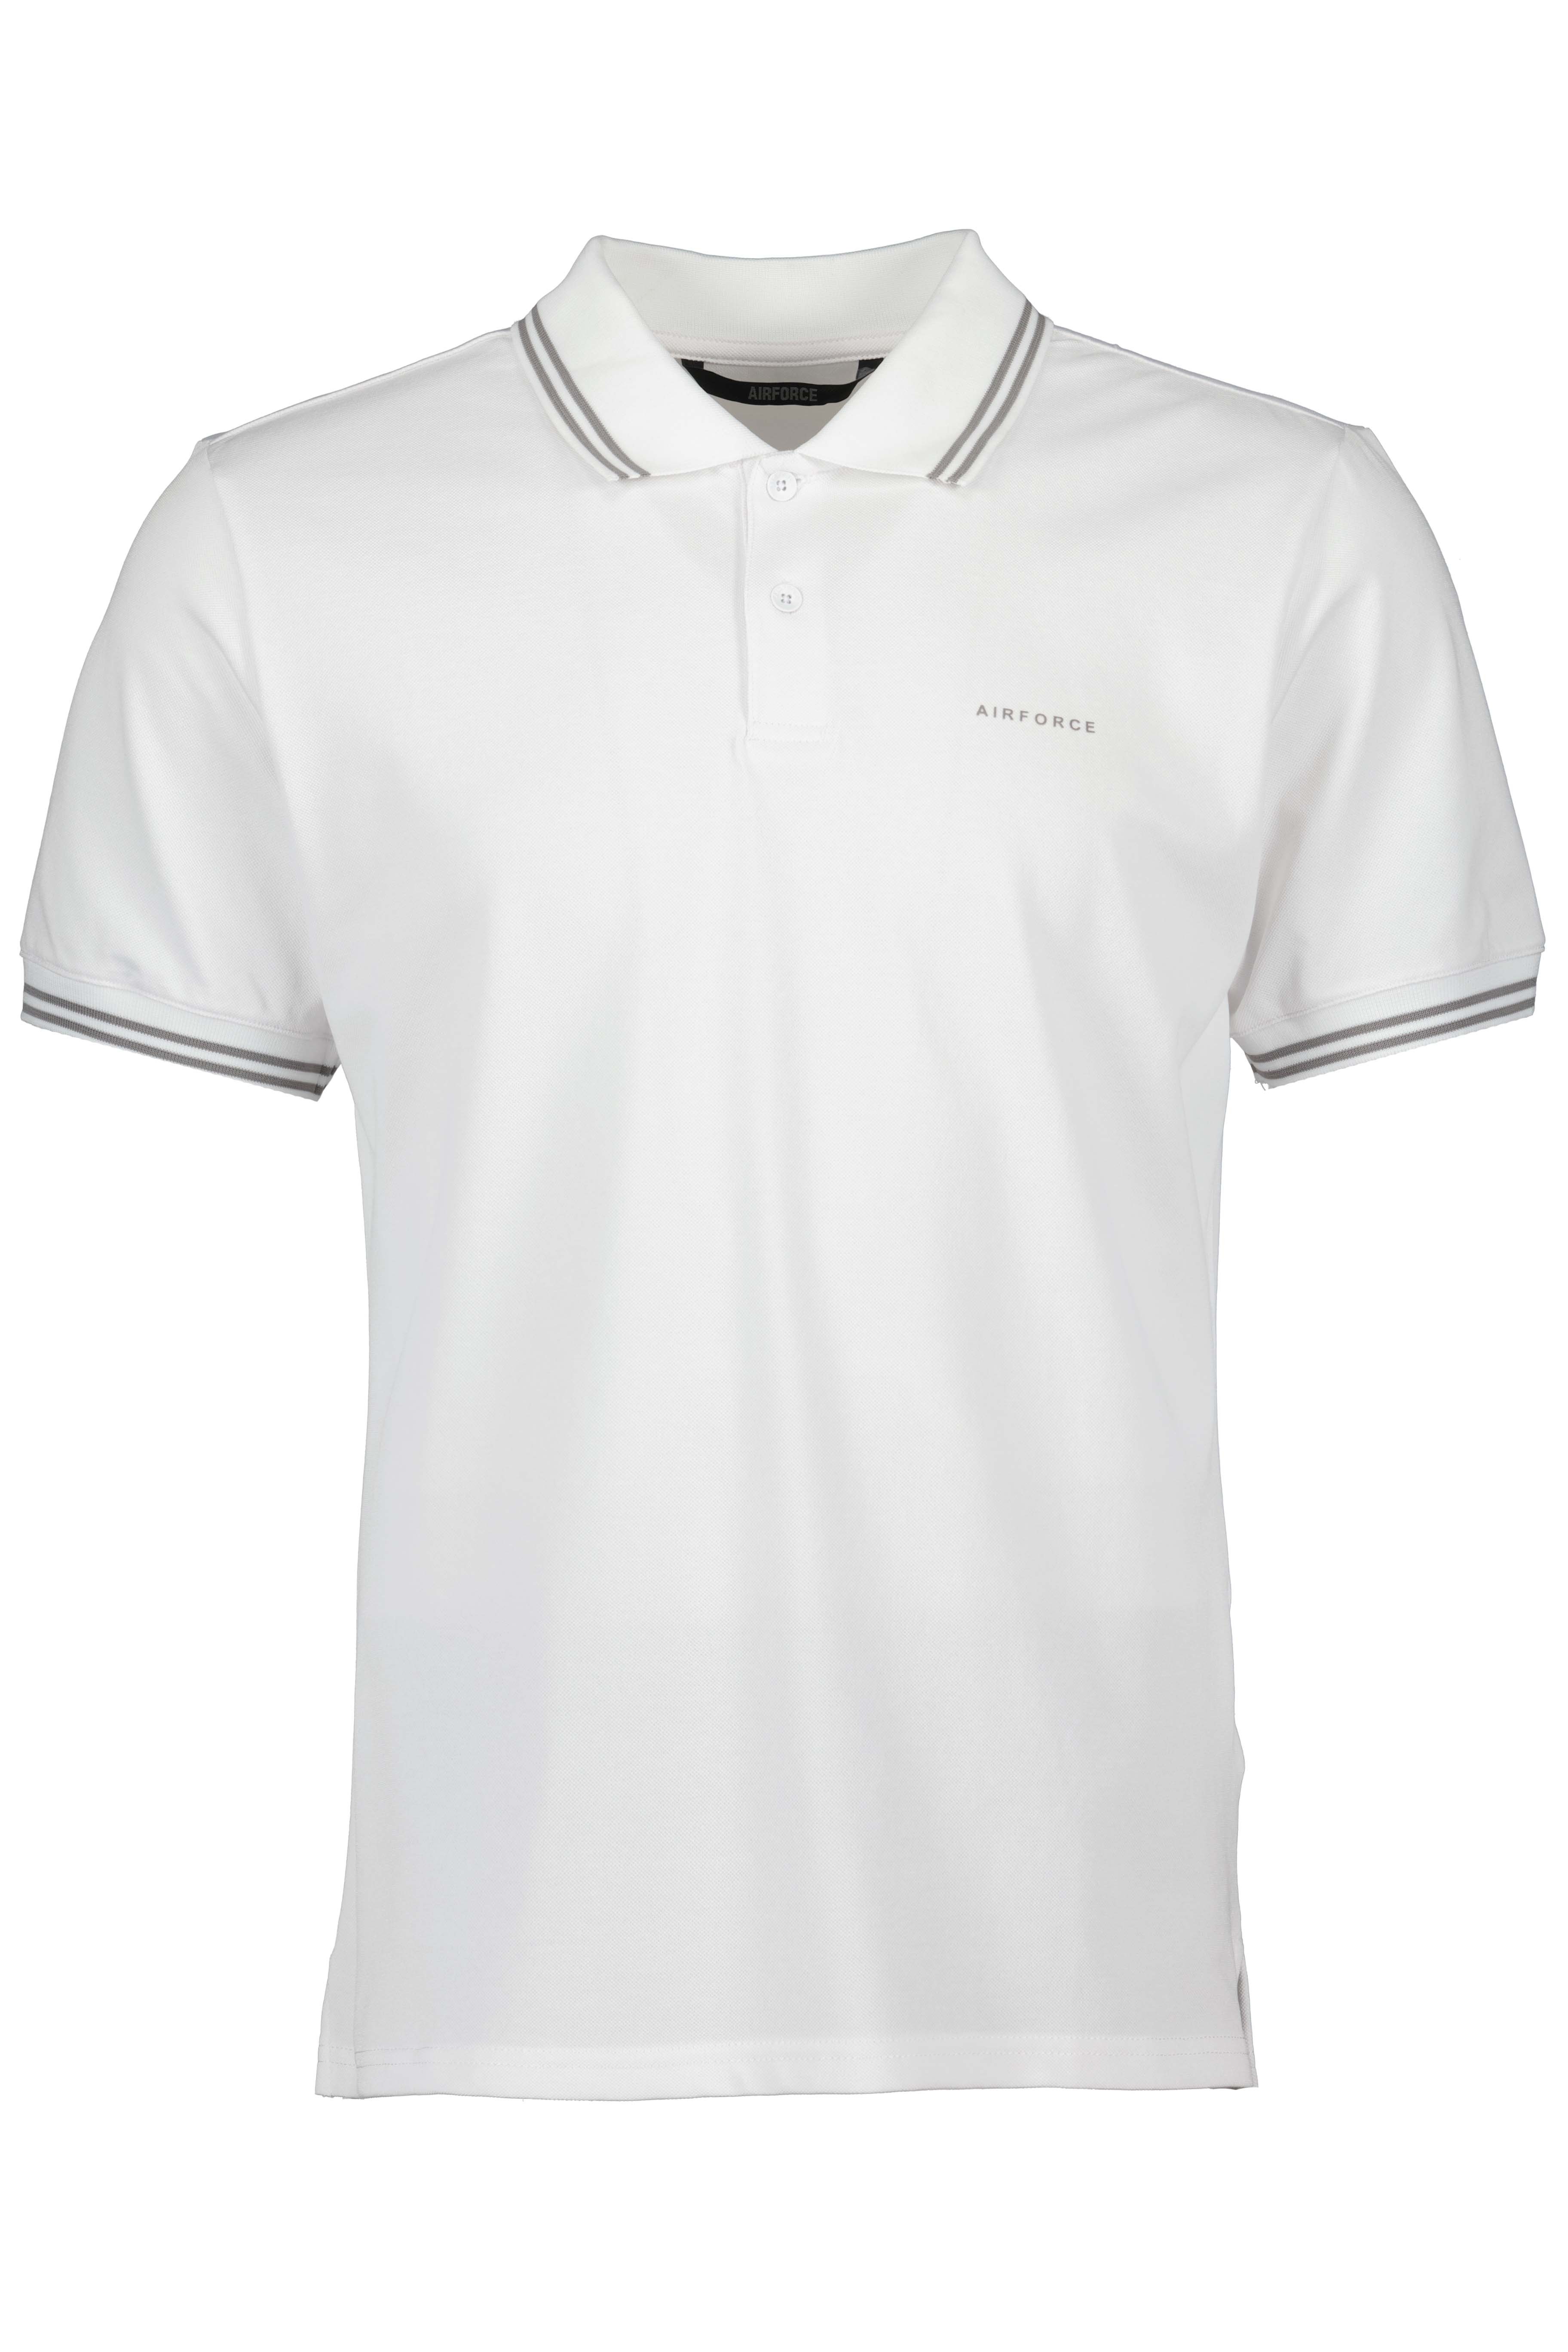 Airforce Mens Polo Double Stripe